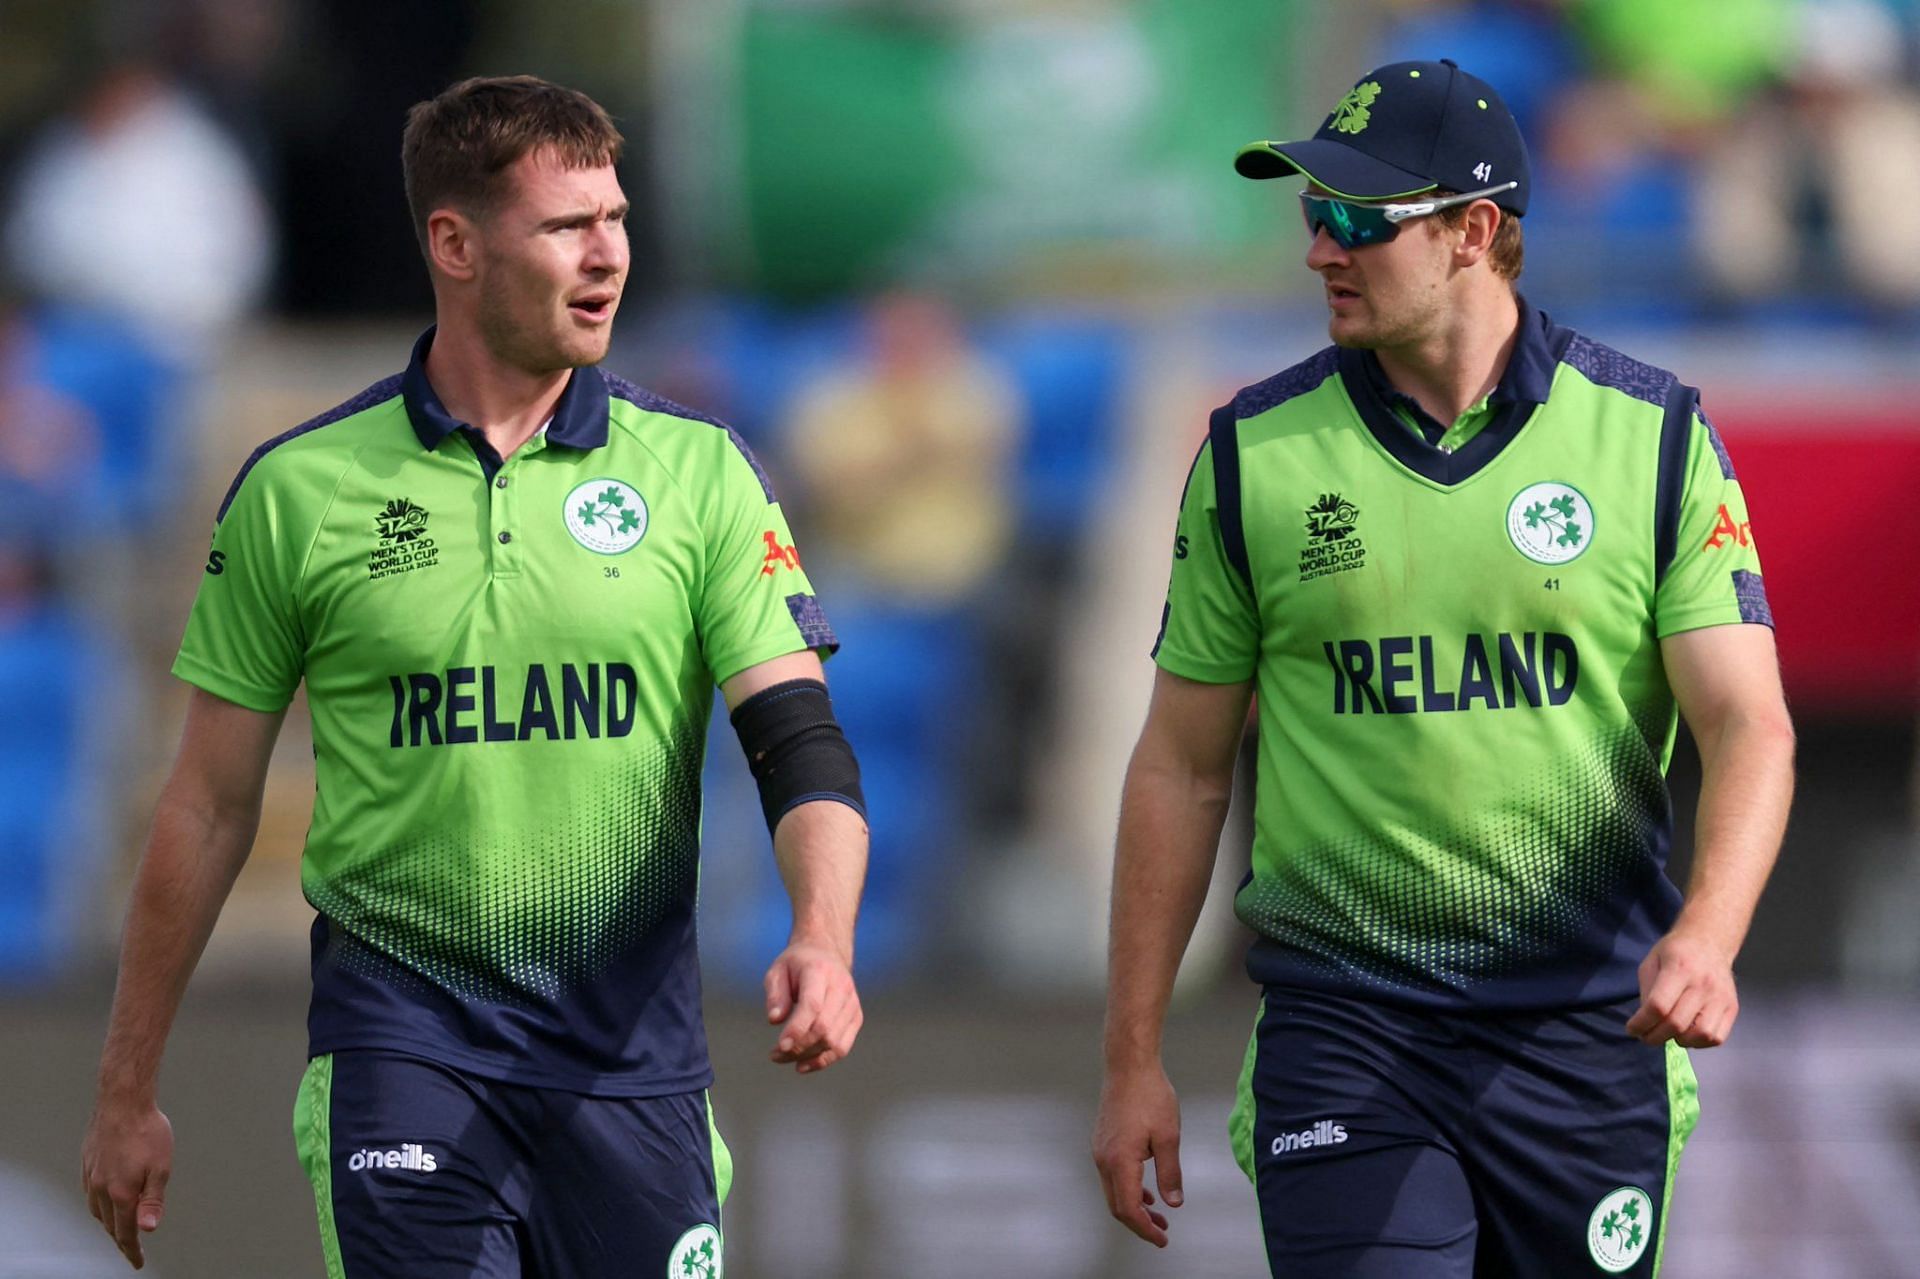 Joshua Little (L) and Andy Balbernie (R) for Ireland [Pic Credit: Ireland Cricket]